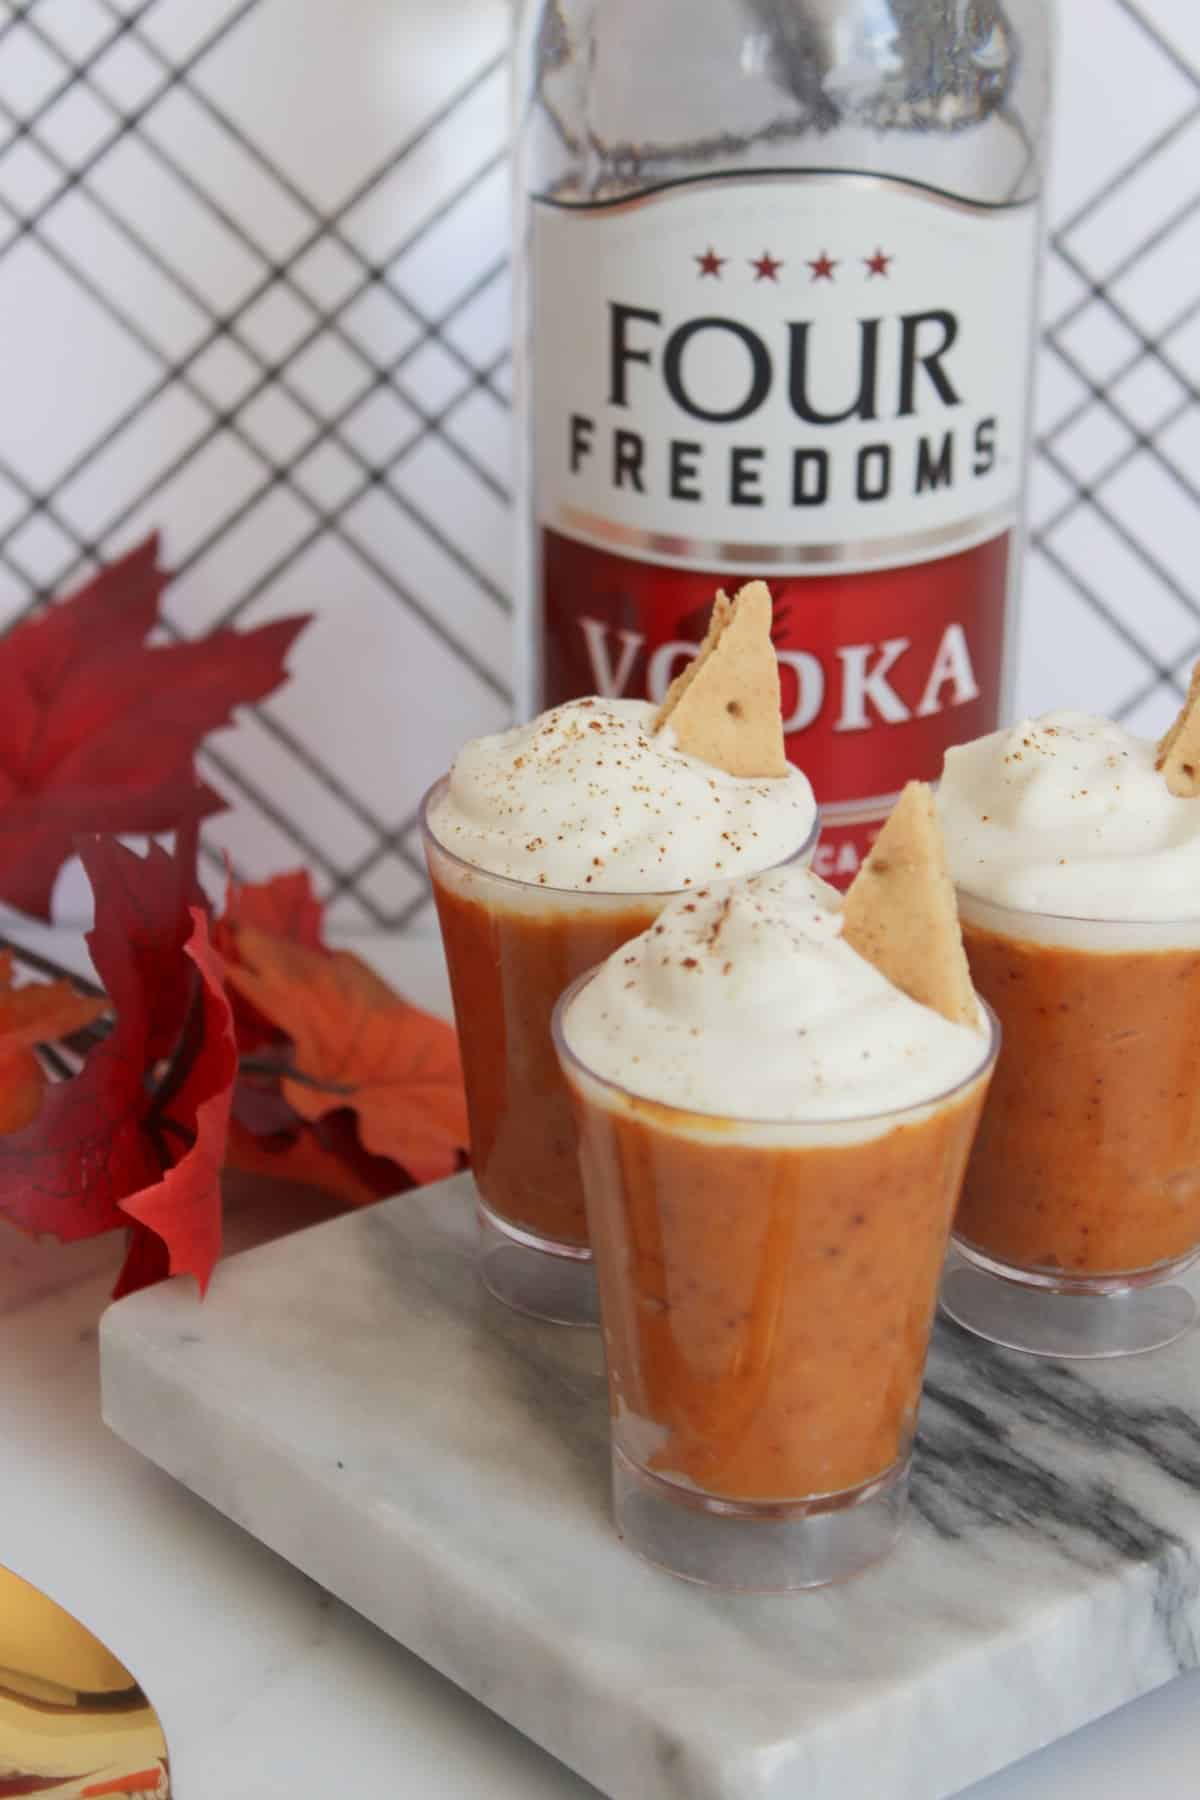 Pumpkin pudding cups with whipped cream in front of bottle of vodka.